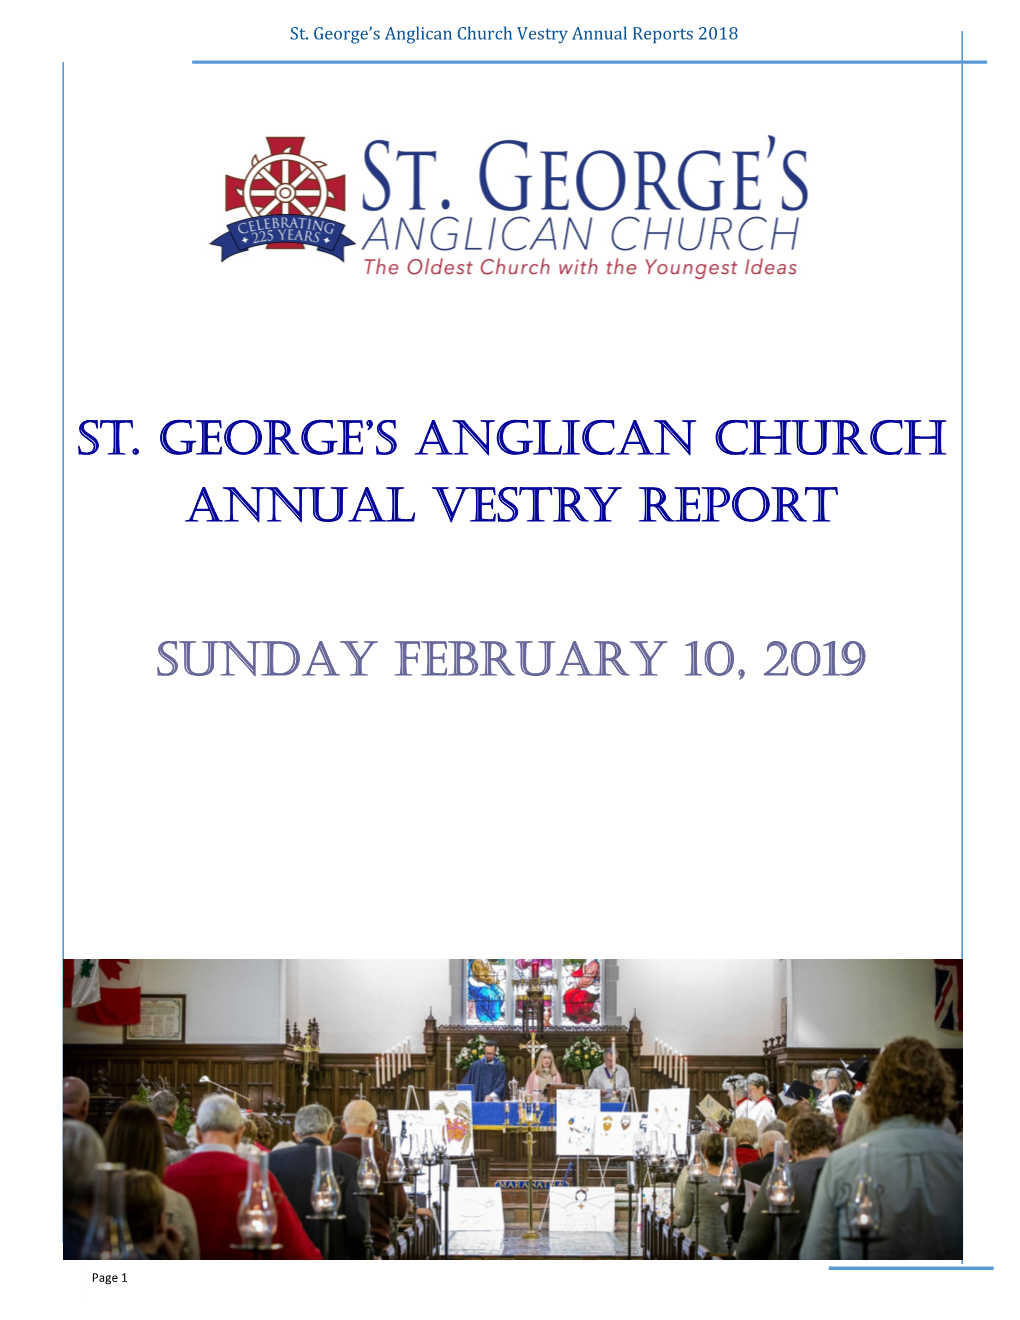 ST. GEORGE's ANGLICAN CHURCH Annual Vestry Report SUNDAY